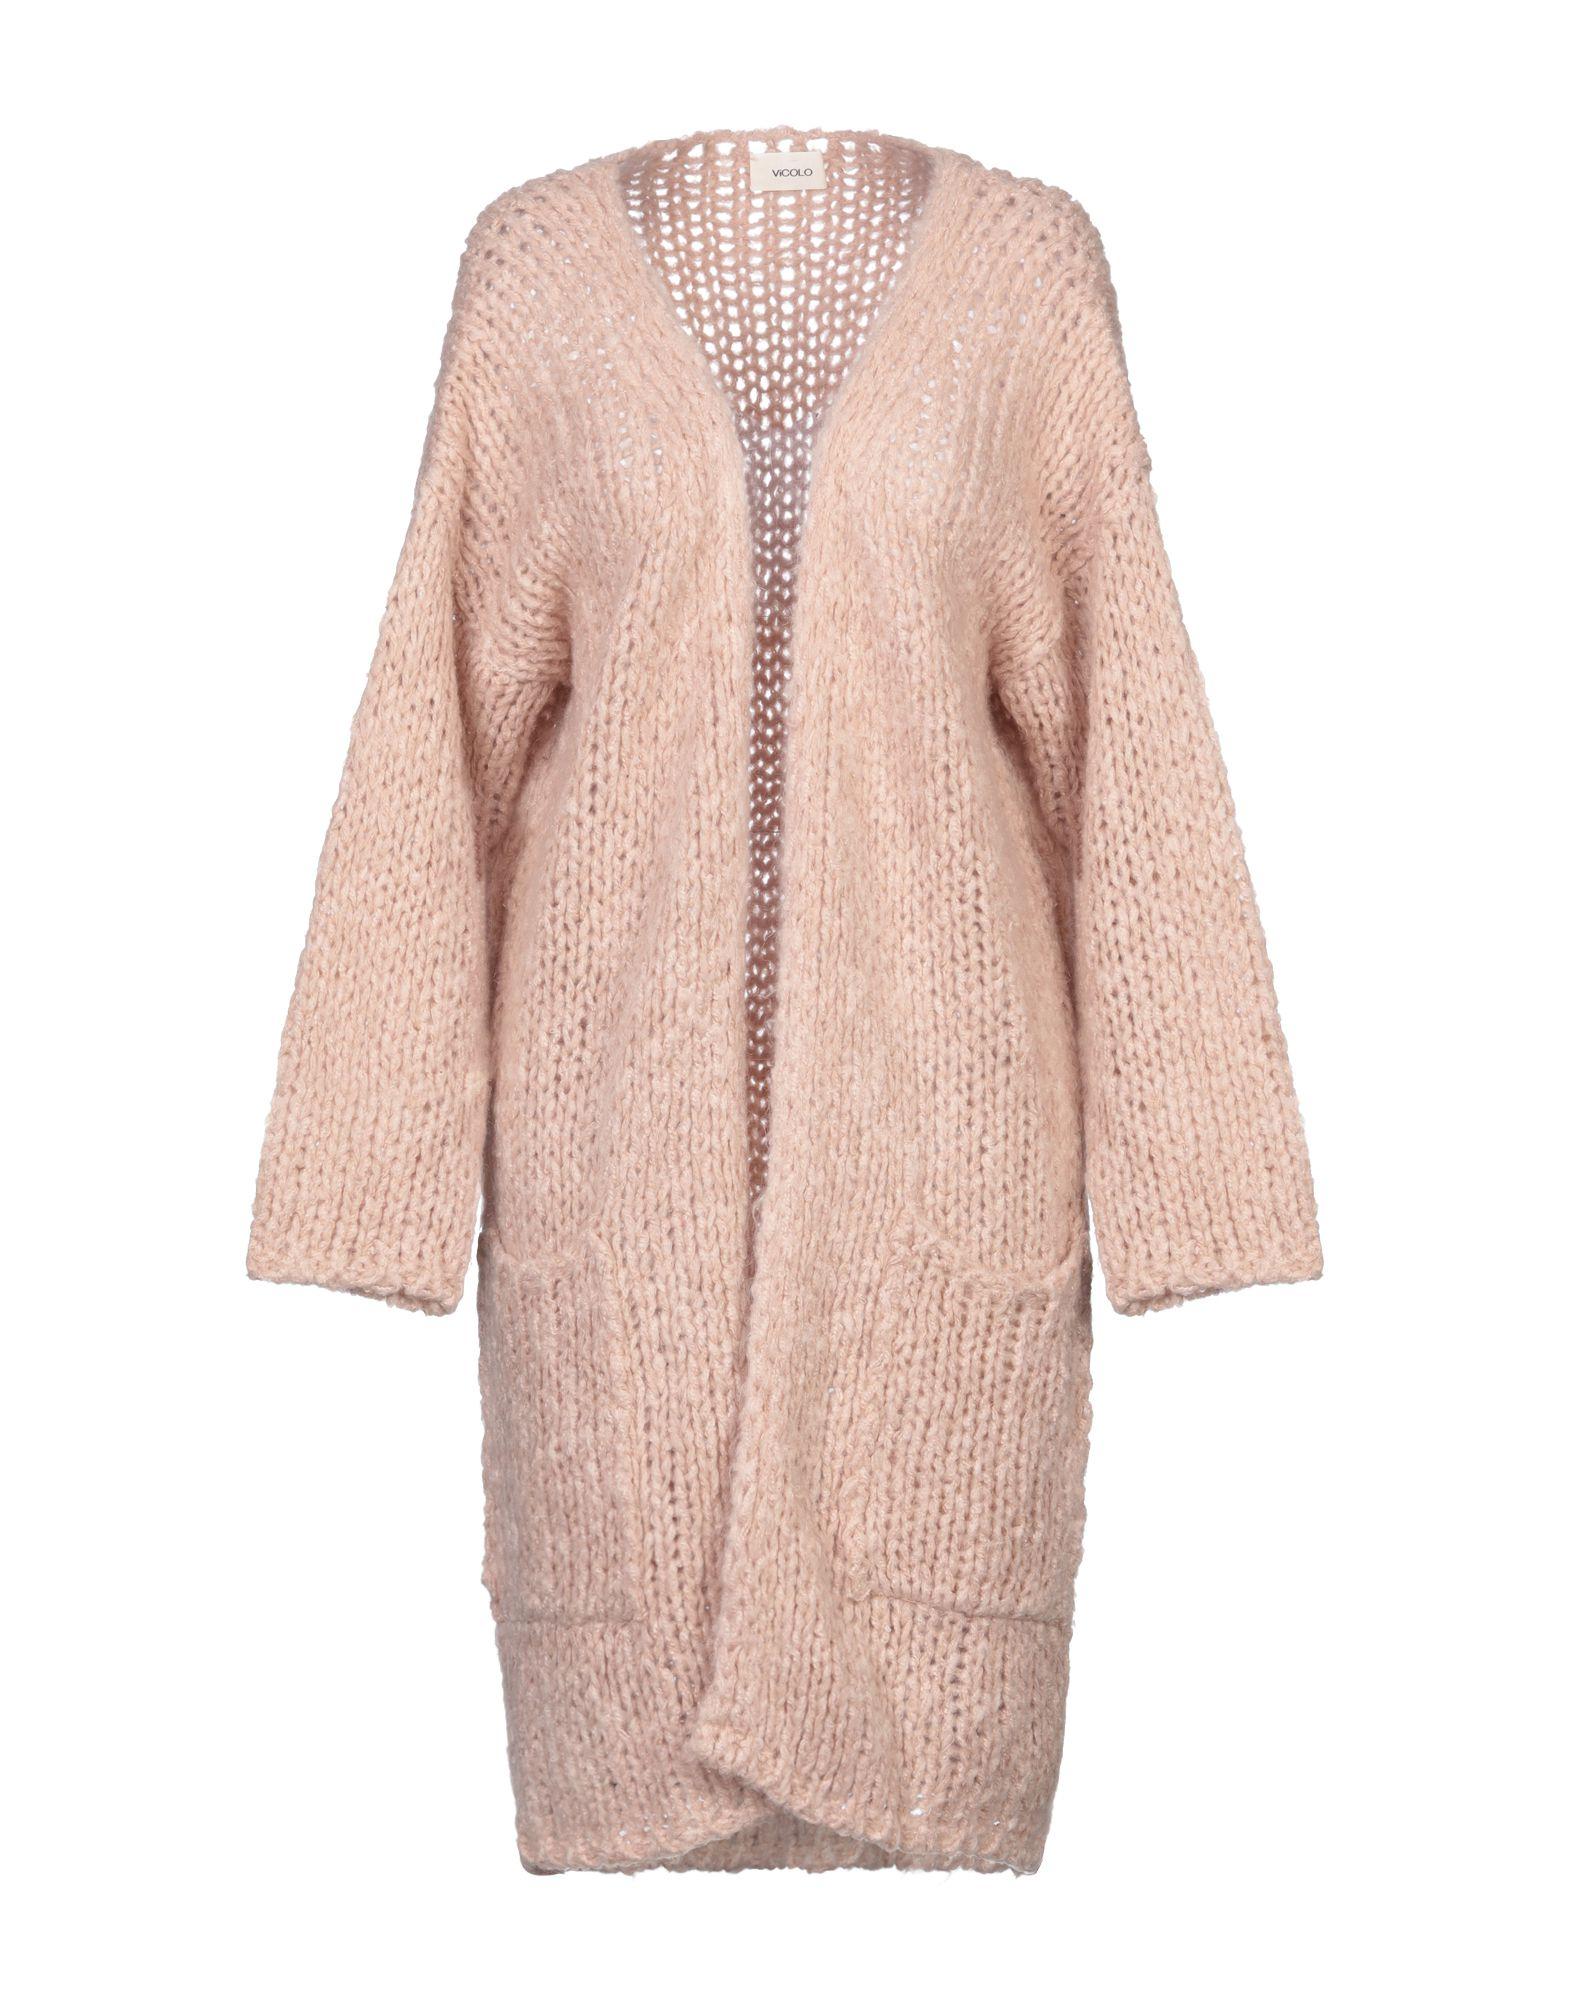 ViCOLO Synthetic Cardigan in Light Pink (Pink) - Lyst